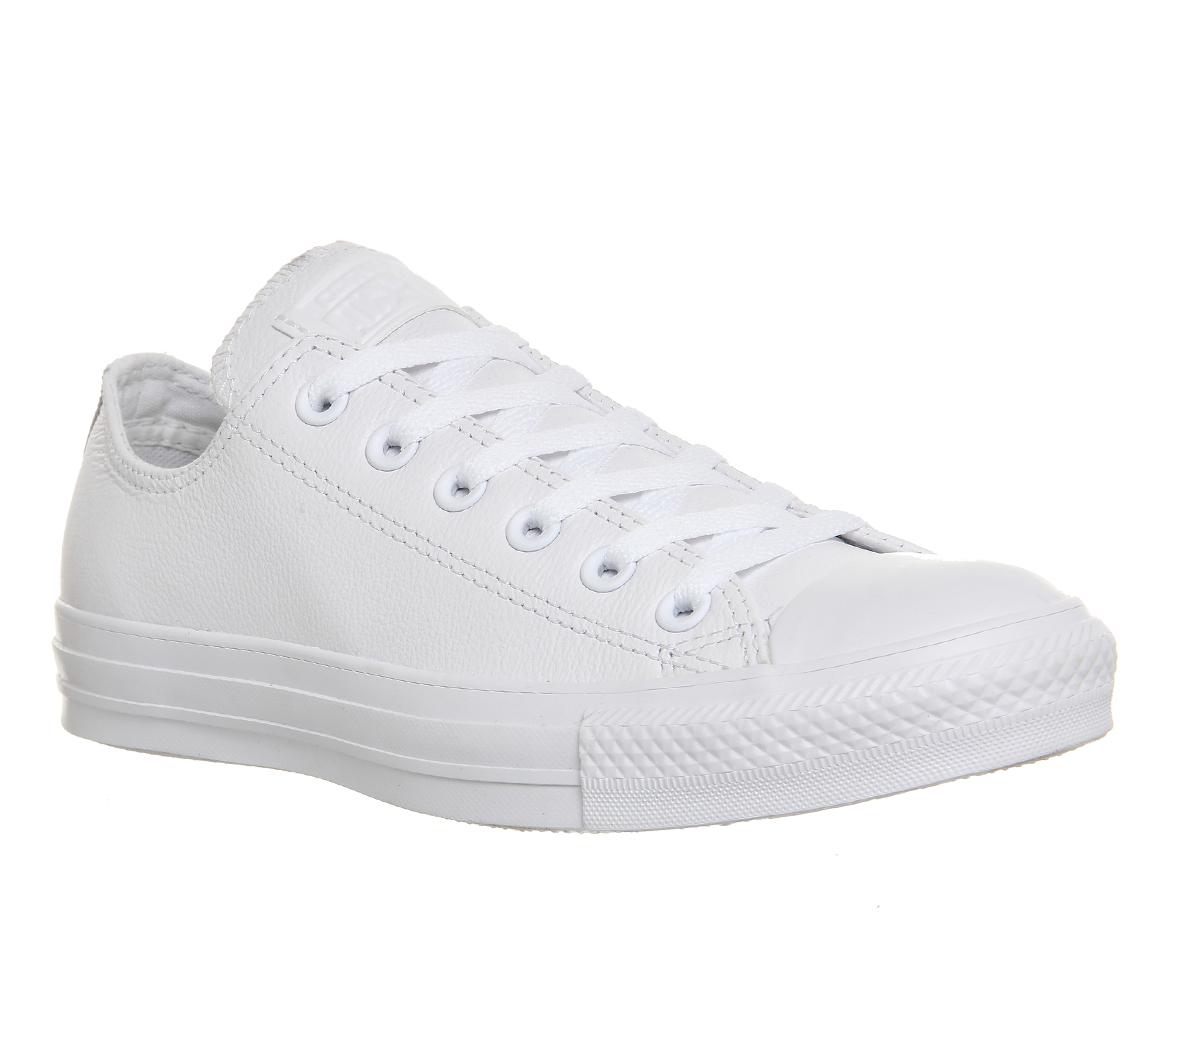 white leather converse size 4 Online 